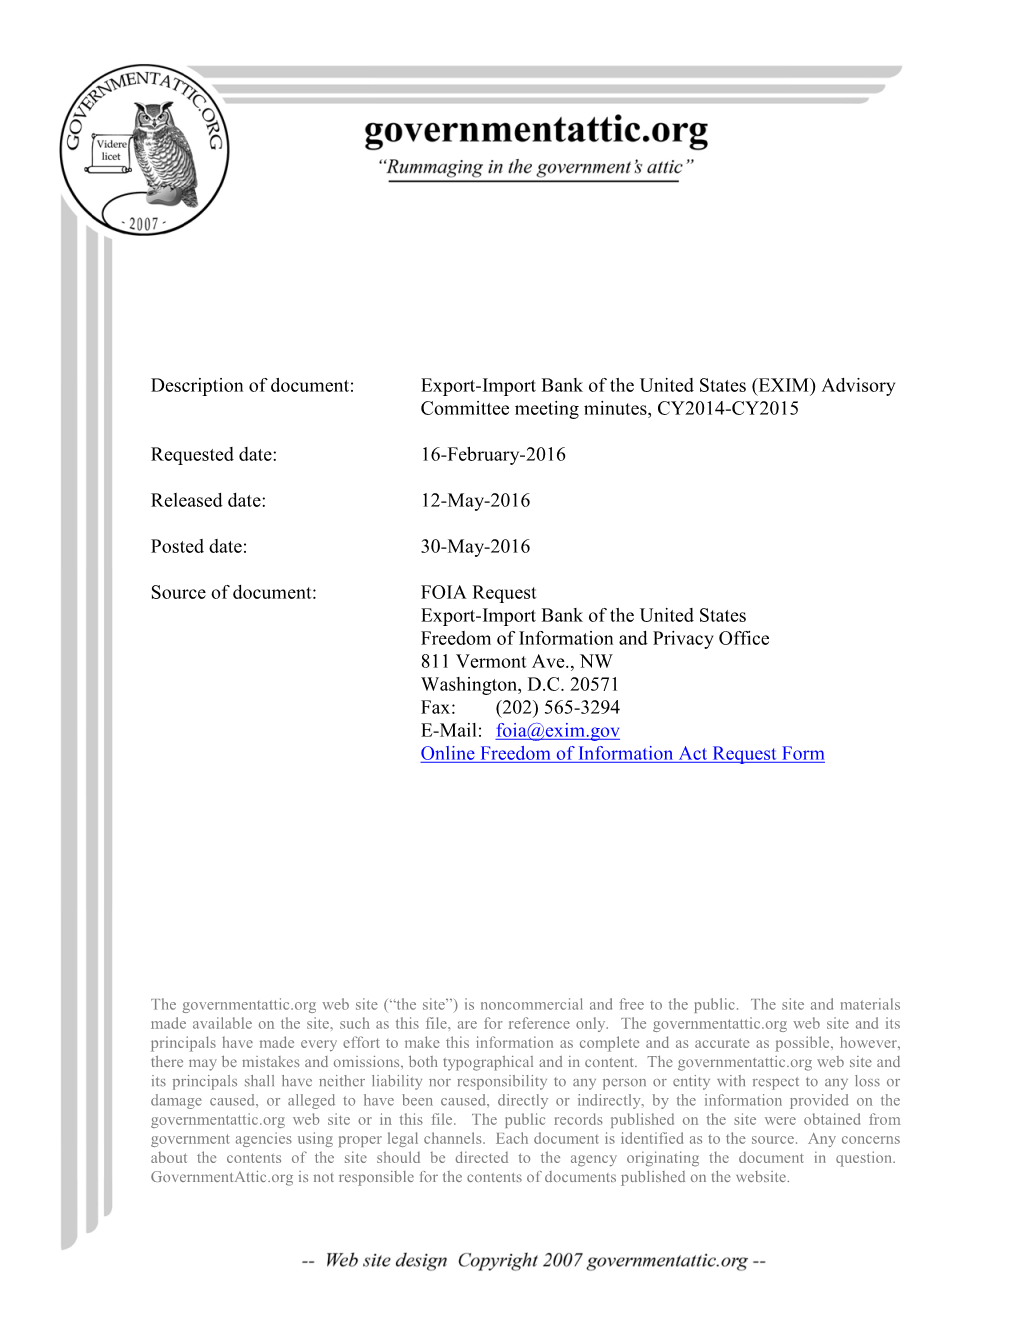 Export-Import Bank of the United States (EXIM) Advisory Committee Meeting Minutes, CY2014-CY2015